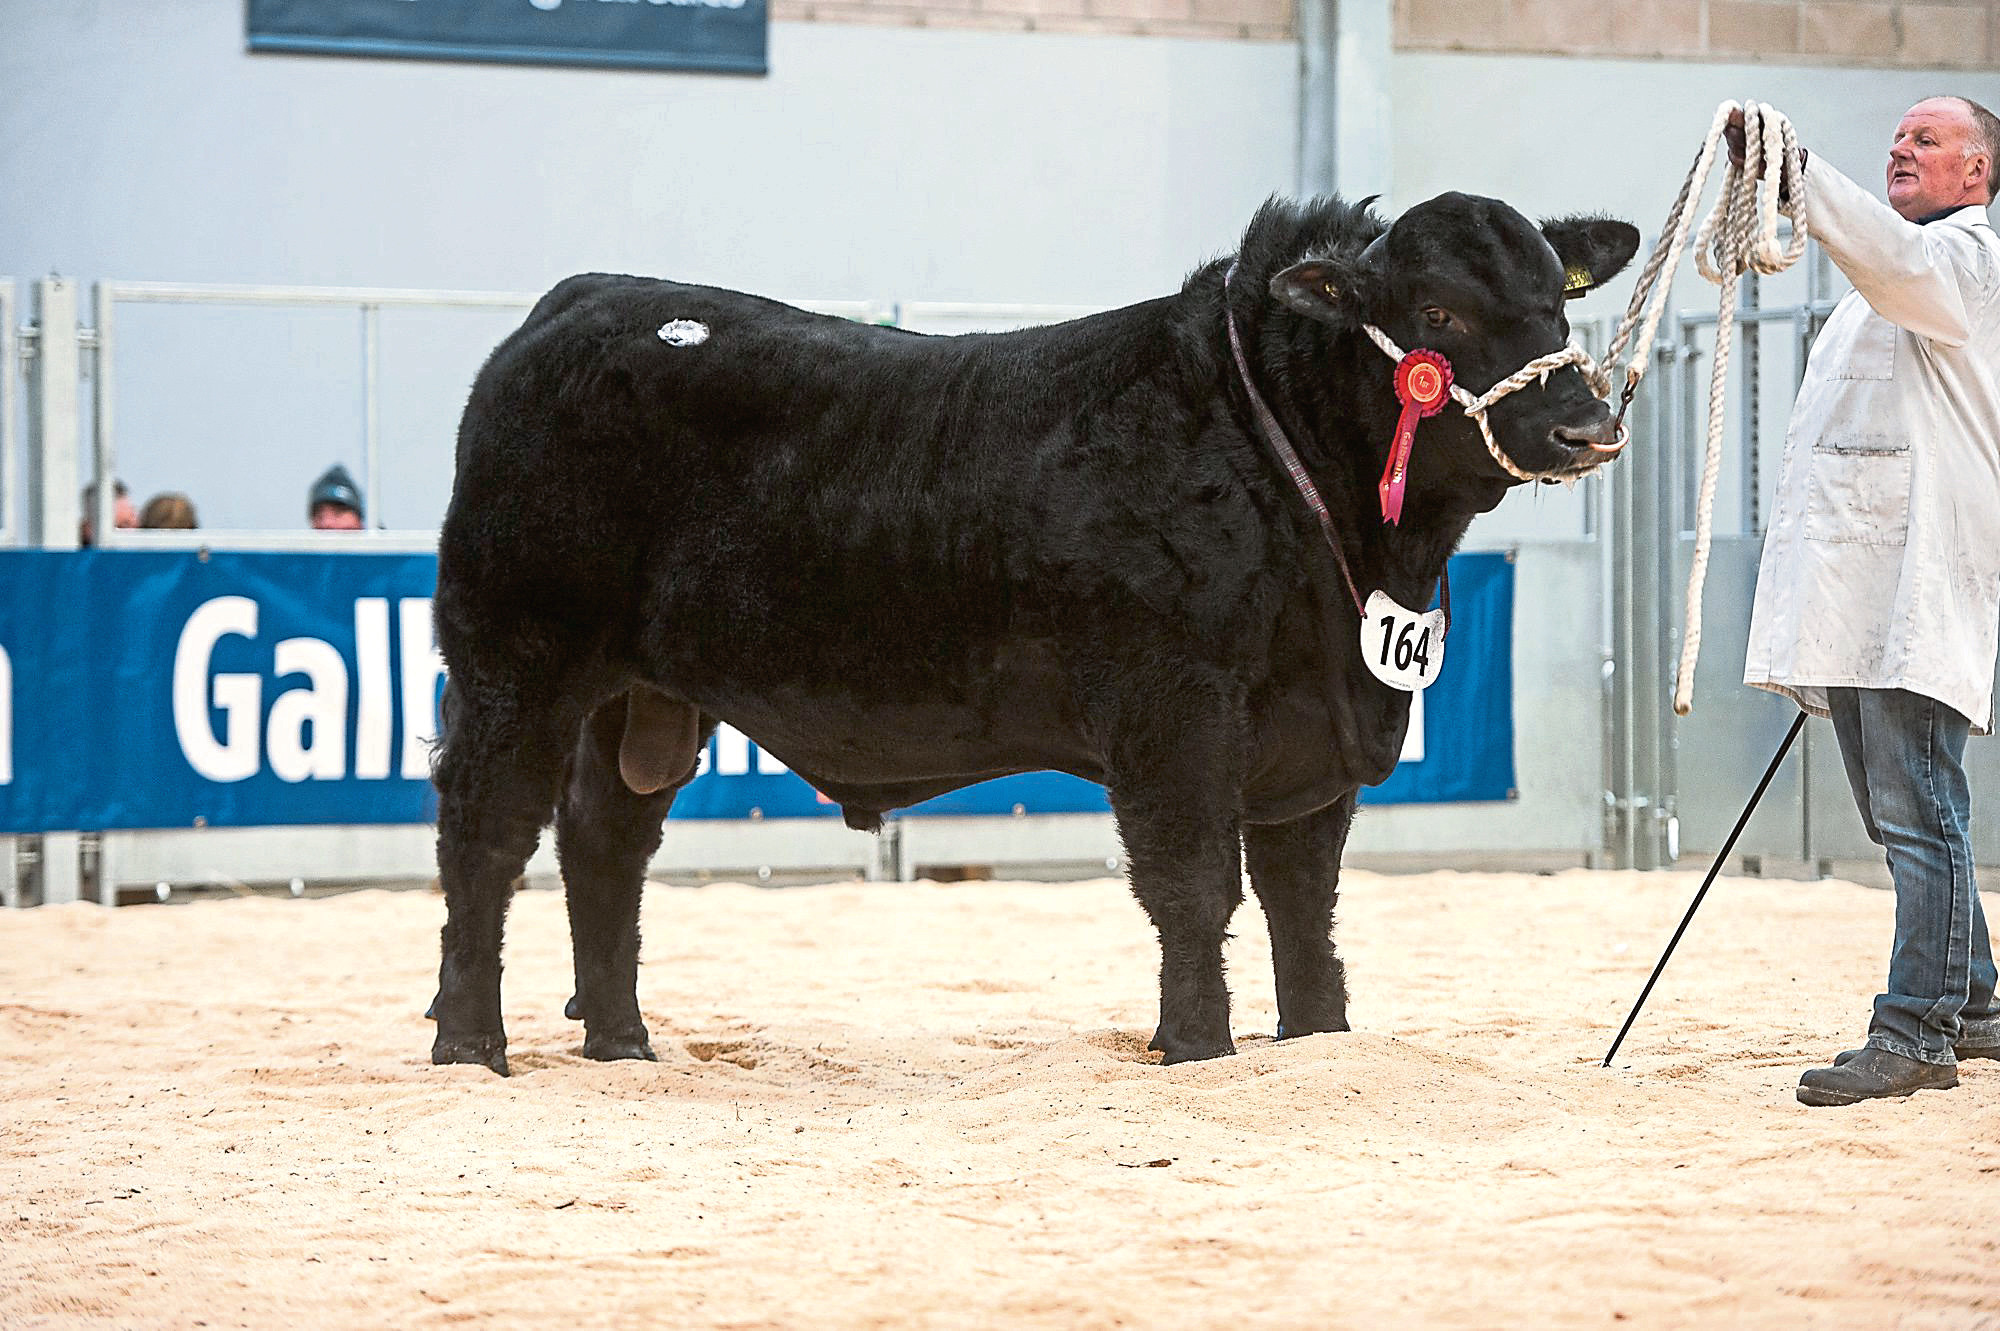 Gordon Barney topped the Aberdeen-Angus trade at 25,000gn.